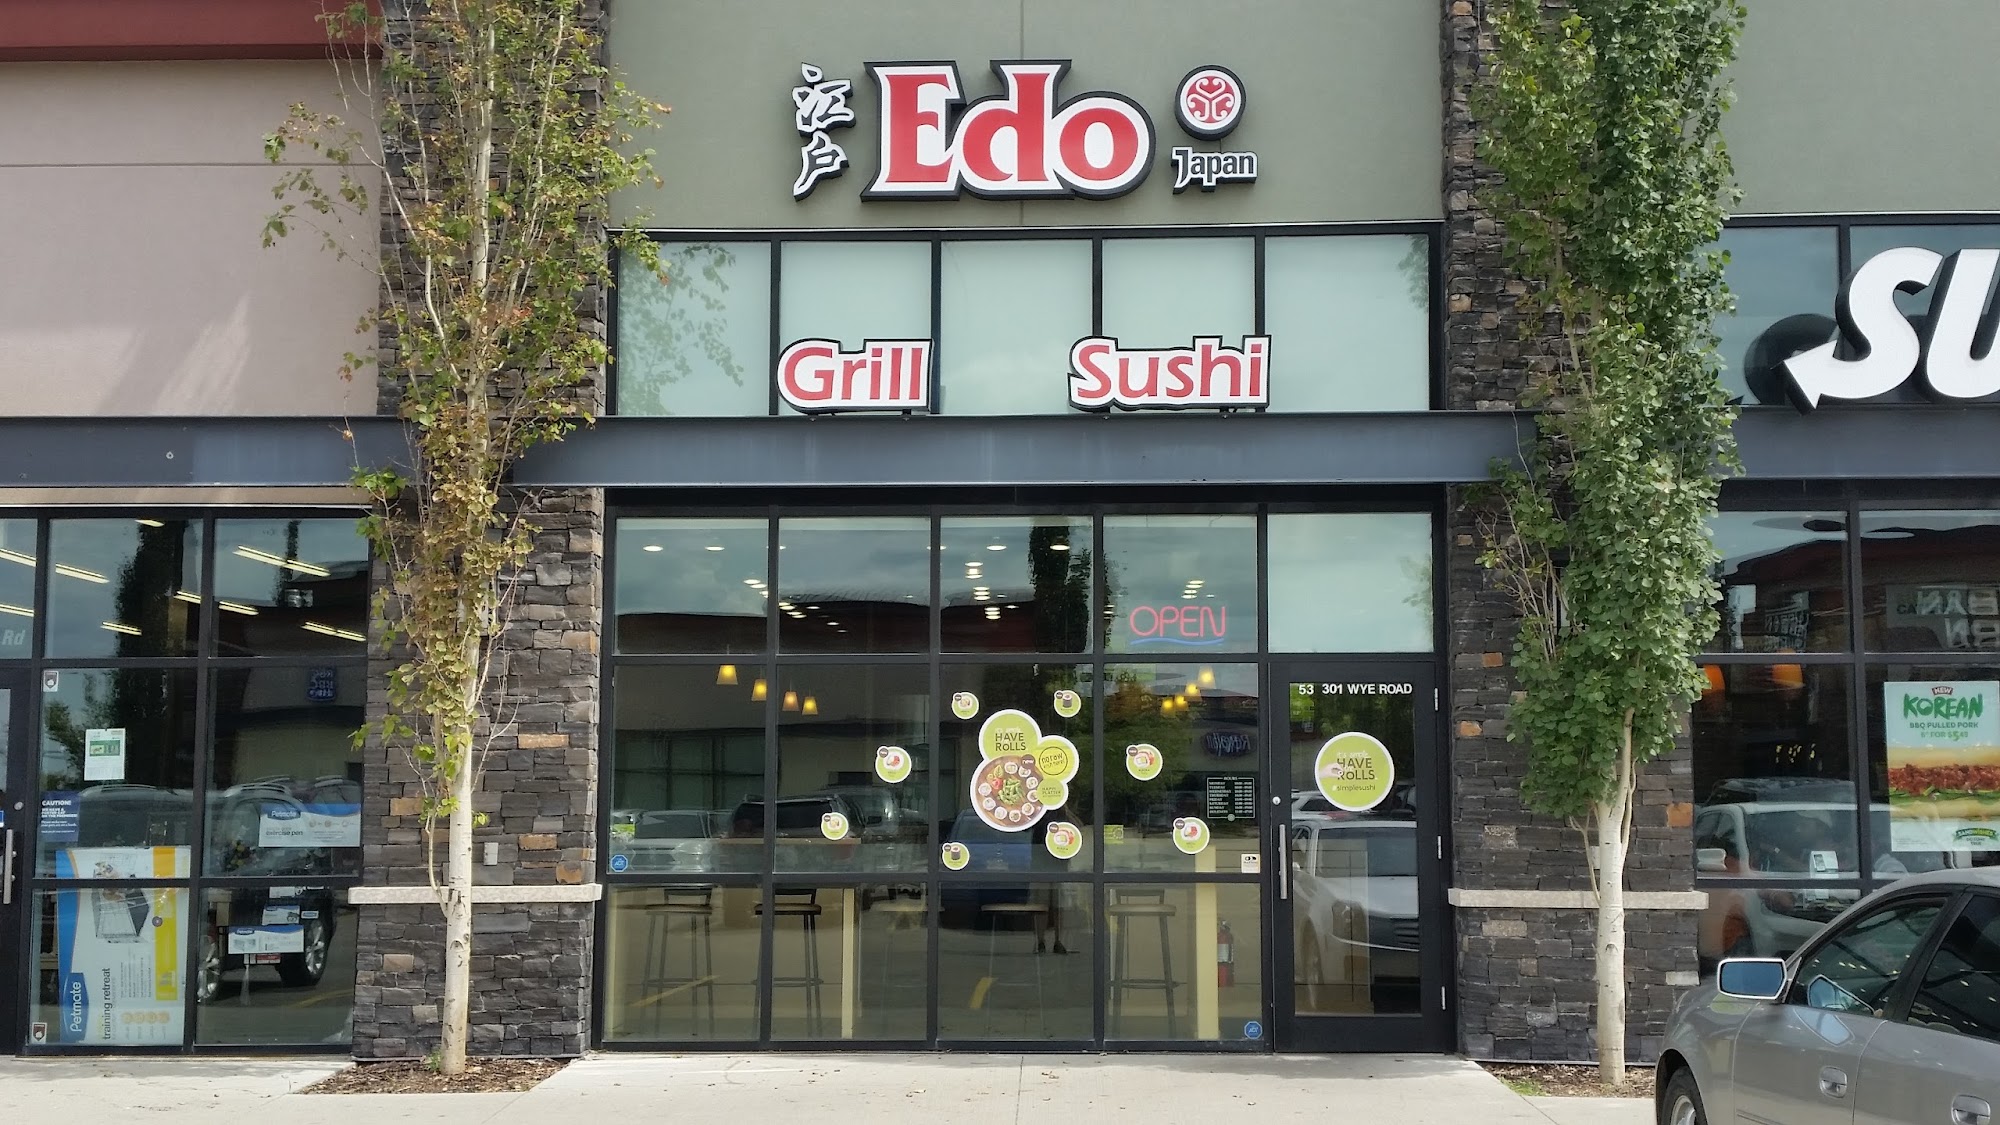 Edo Japan - Wye Road Crossing - Grill and Sushi